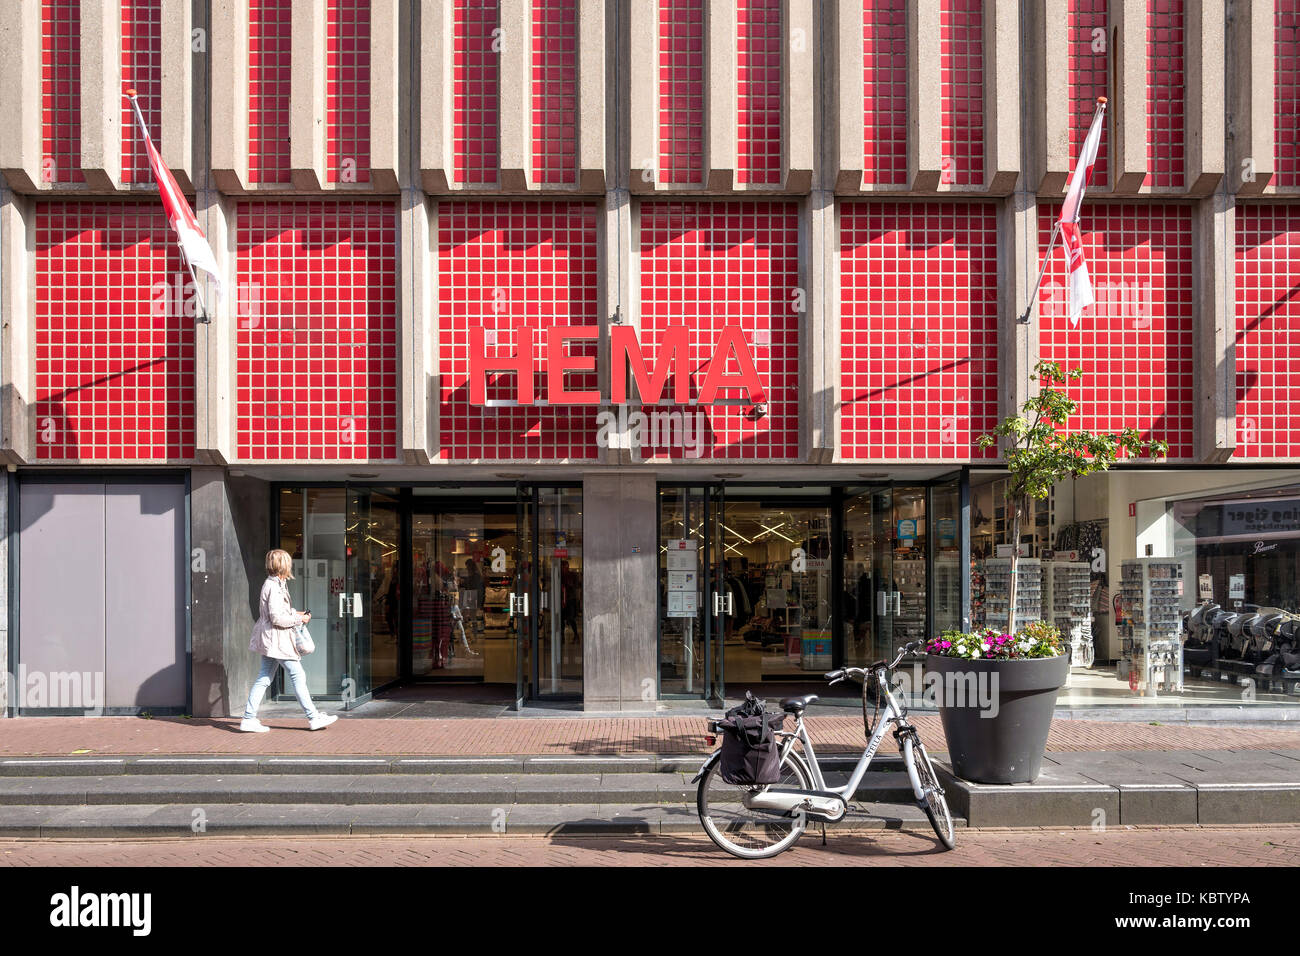 HEMA branch in Gouda, Netherlands. HEMA is a Dutch department store chain and is owned by the British investment firm Lion Capital LLP since 2007. Stock Photo